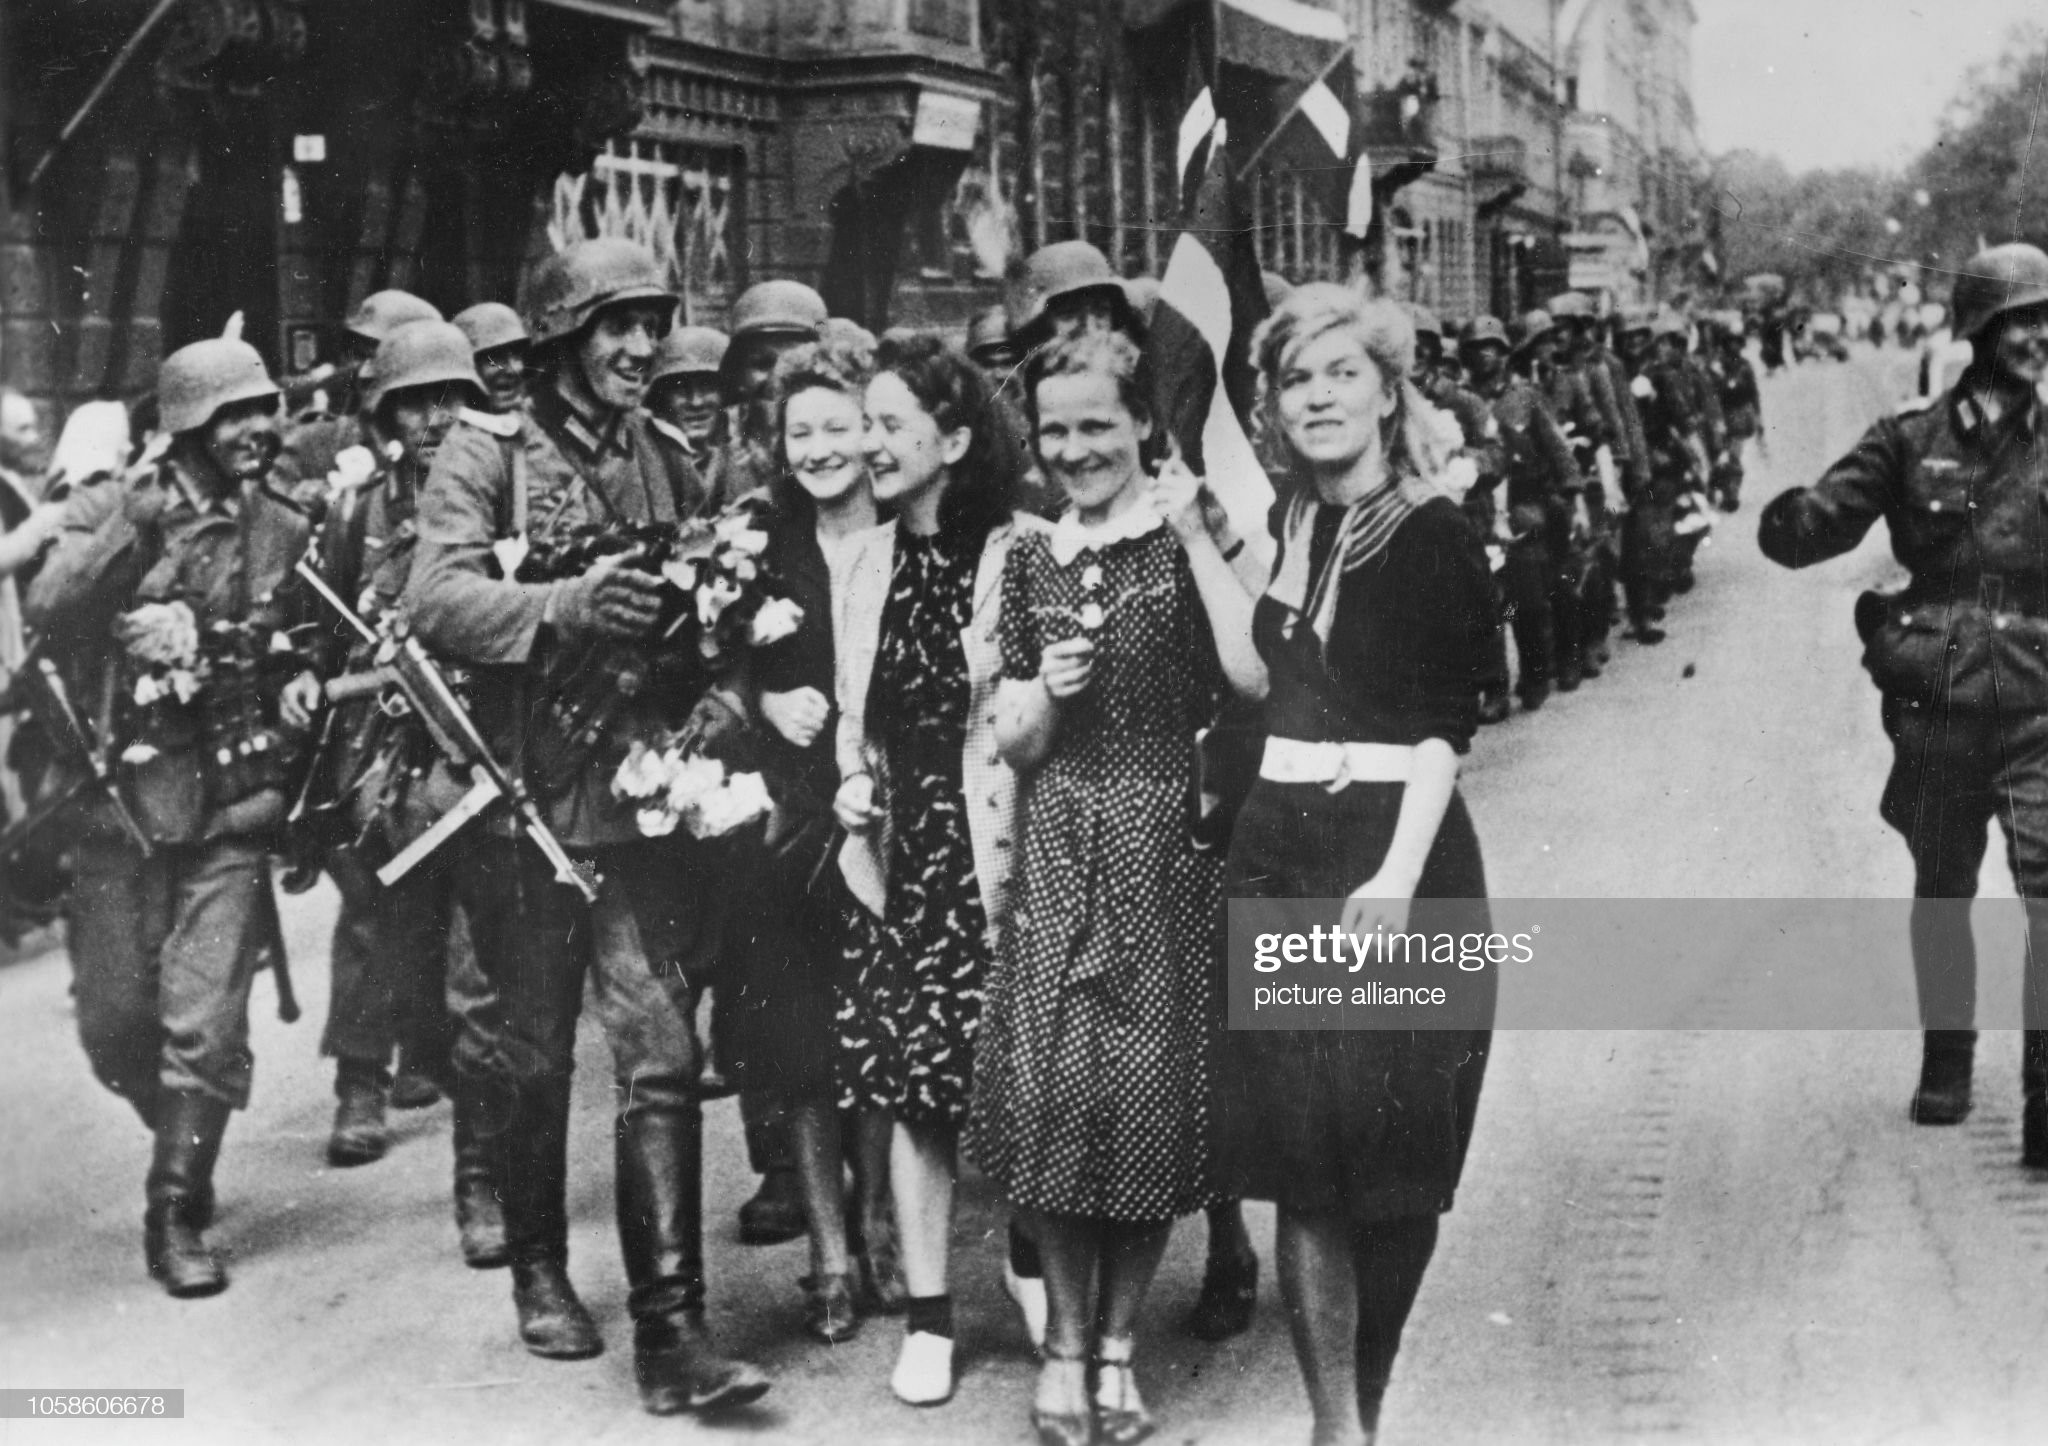 German soldiers are greeted by residents as they march into Soviet occupied Riga, Latvia, July 1941. 